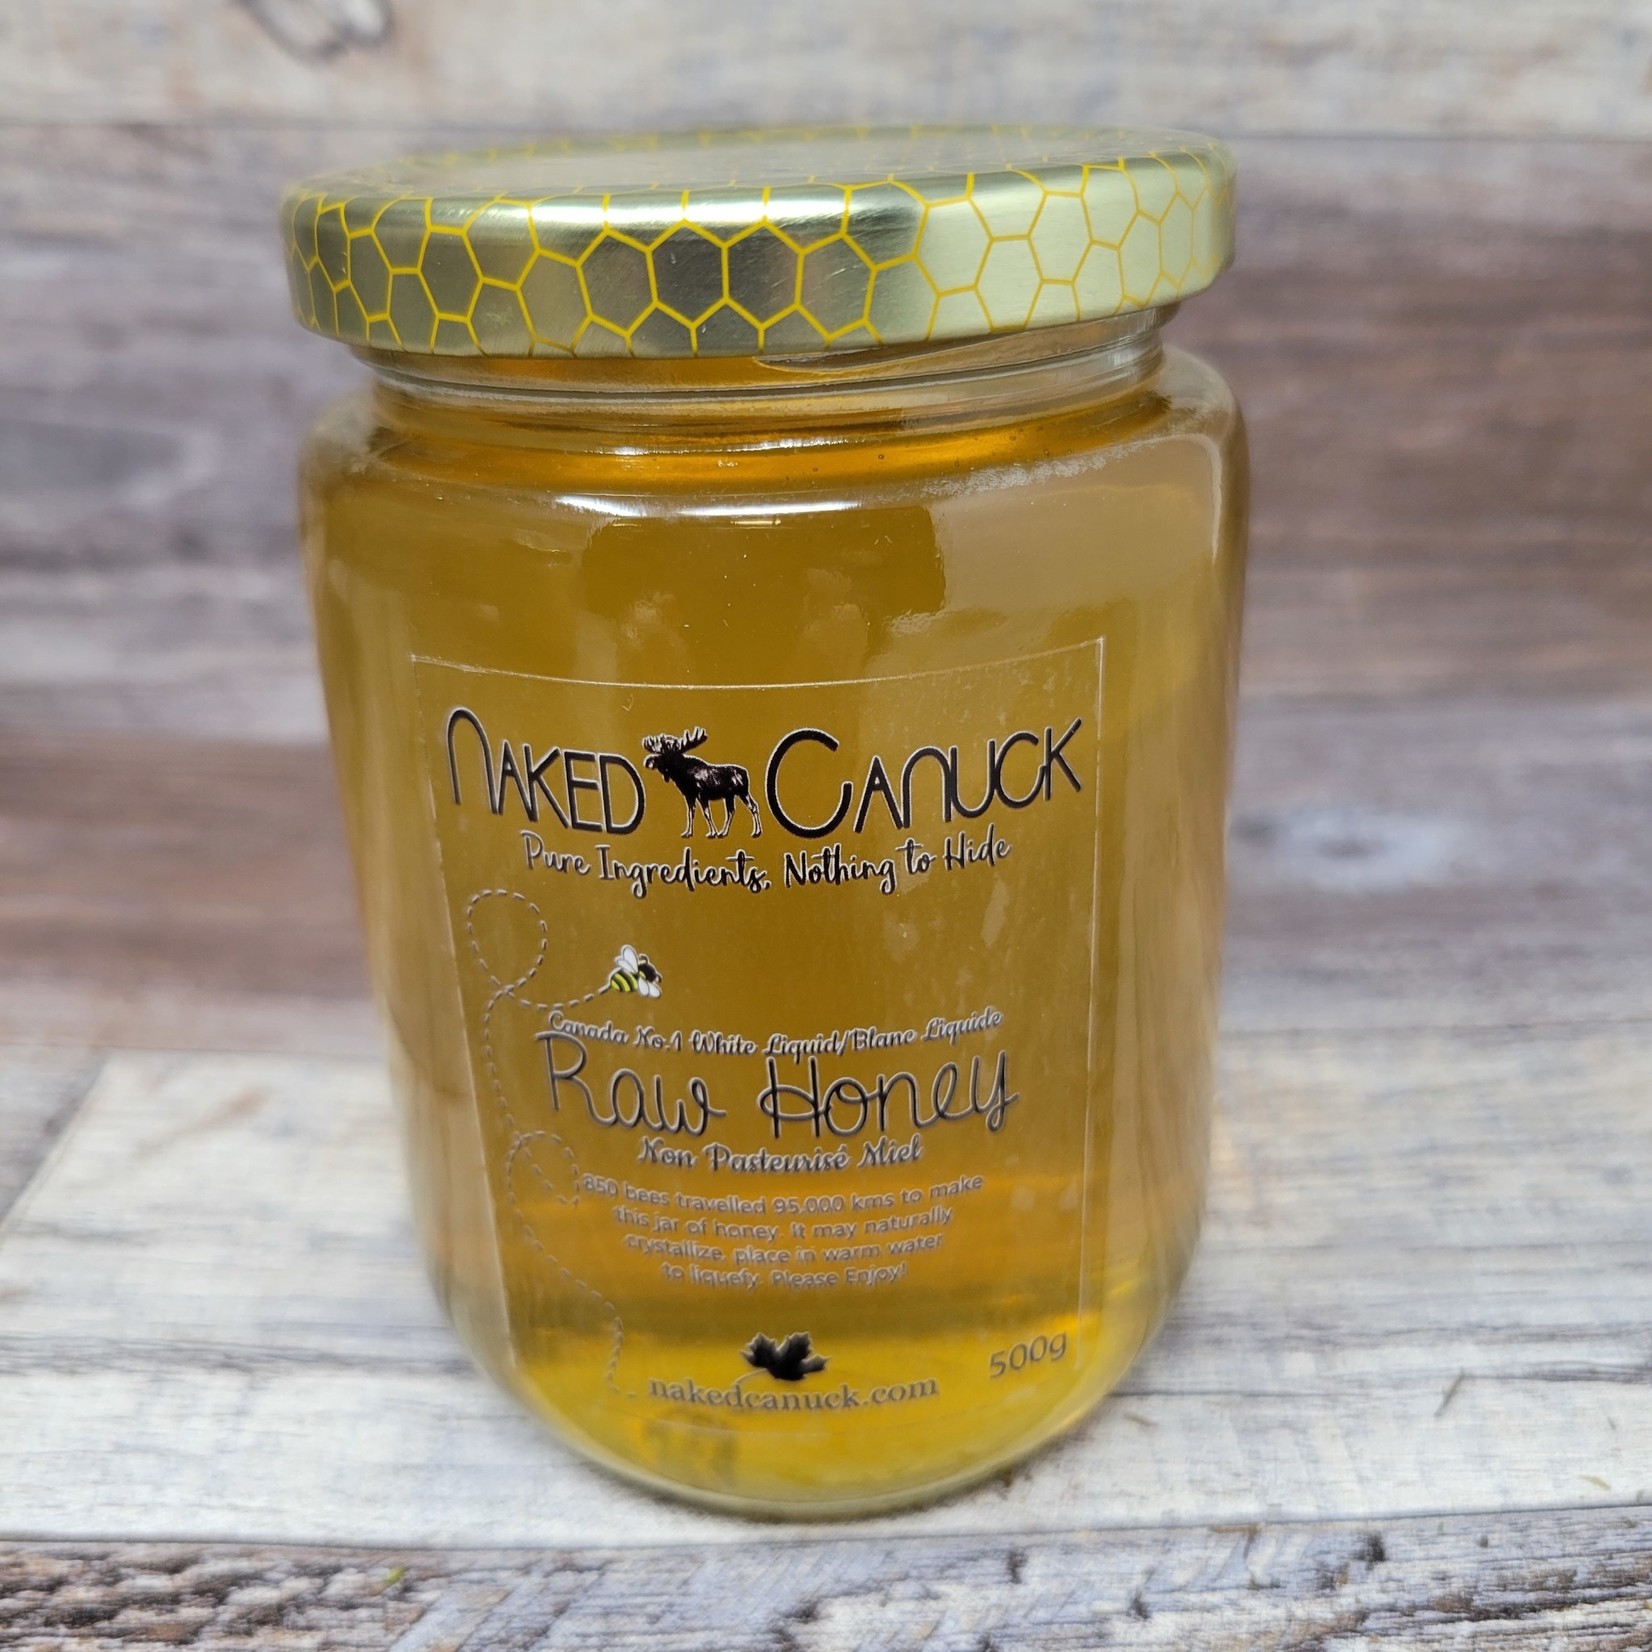 Naked Canuck Pure Raw Honey